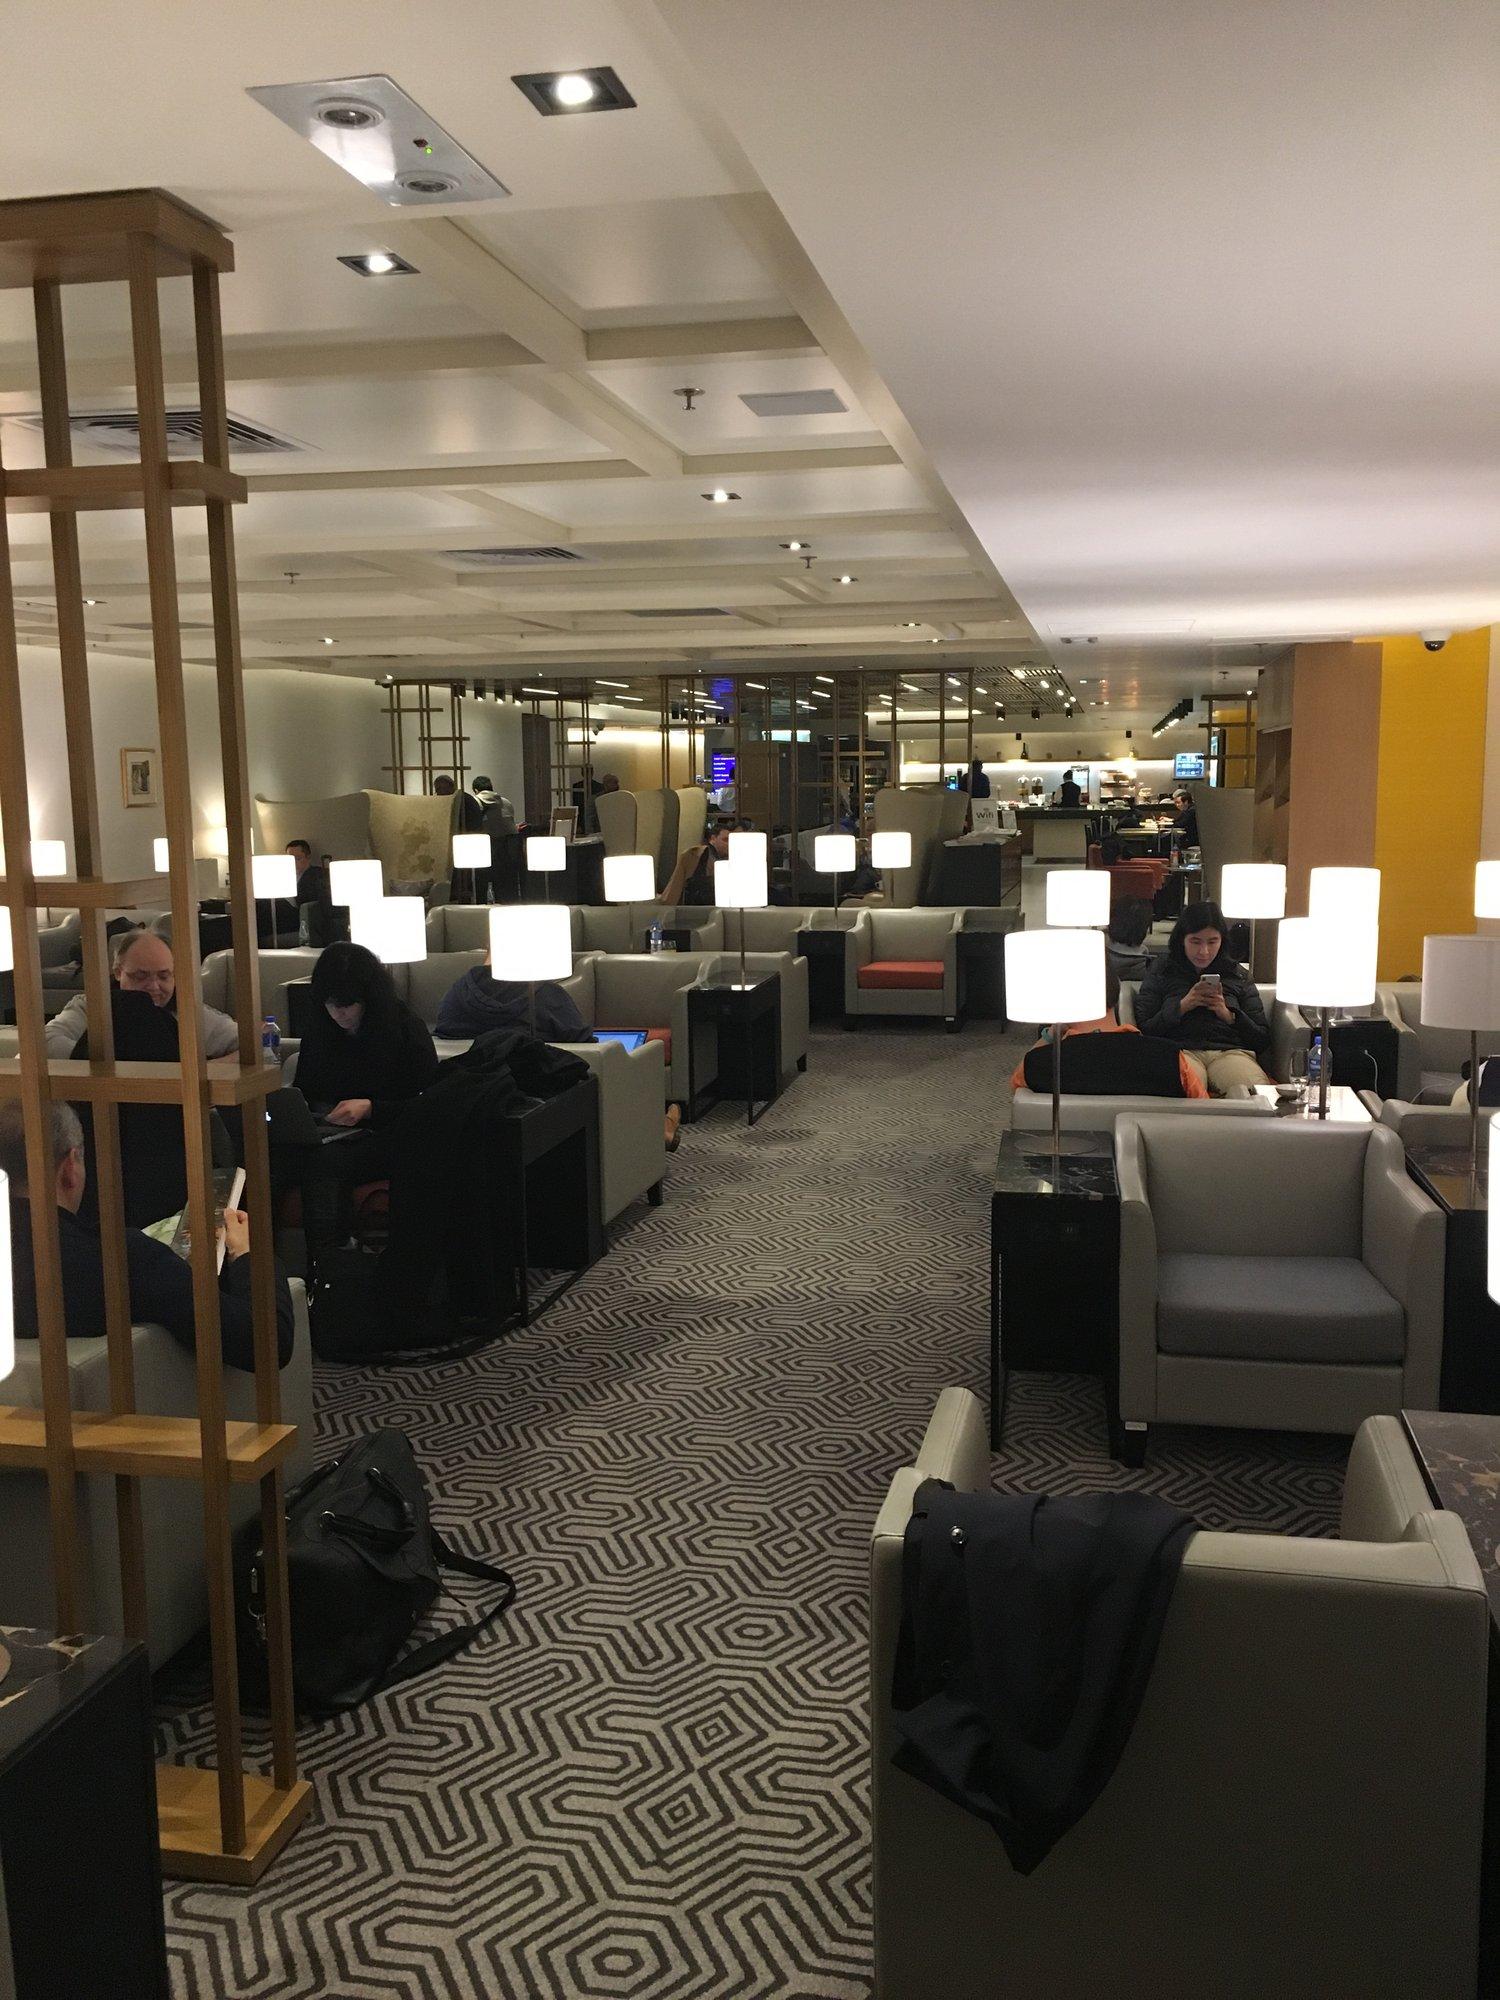 Singapore Airlines SilverKris Business Class Lounge image 21 of 68